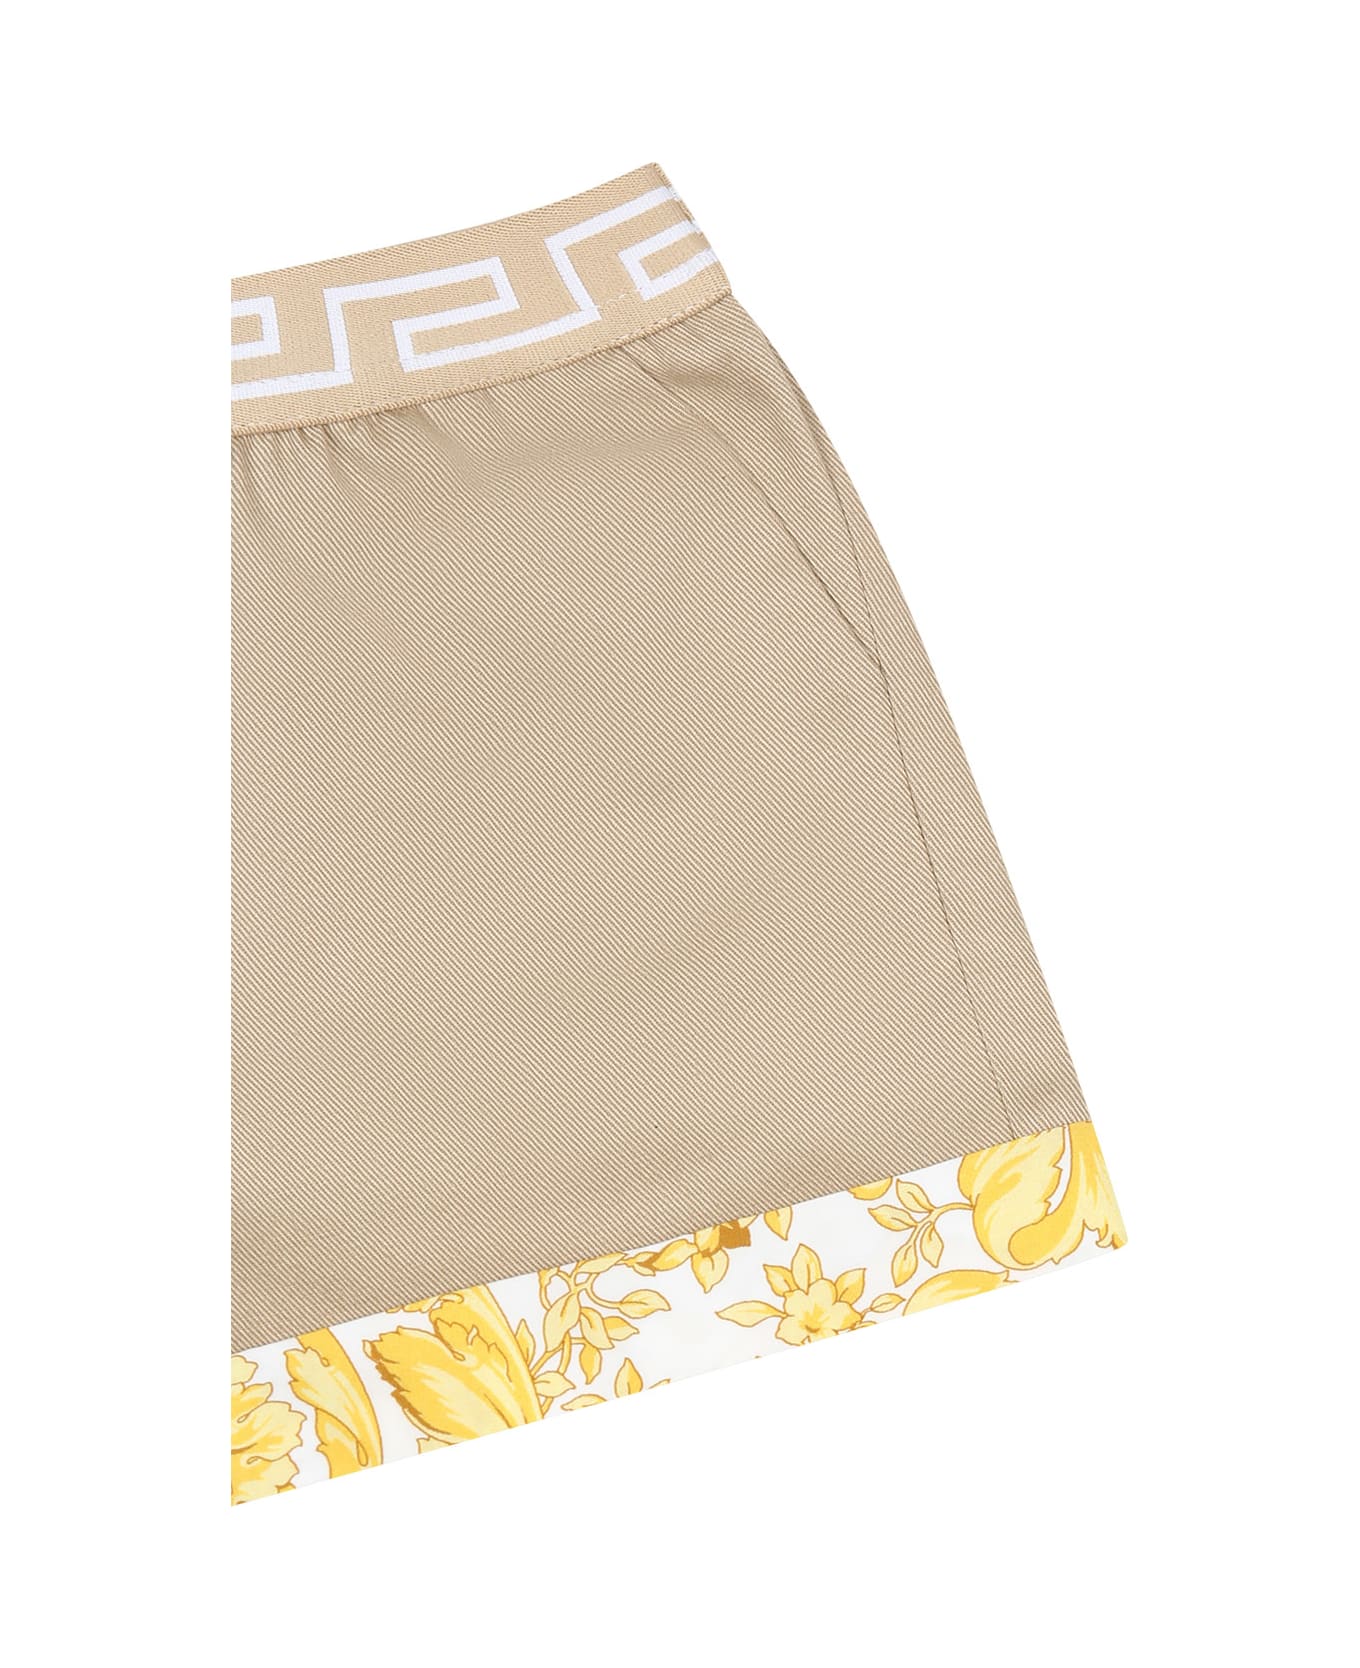 Versace Beige Shorts For Baby Boy With Baroque Print - Beige ボトムス